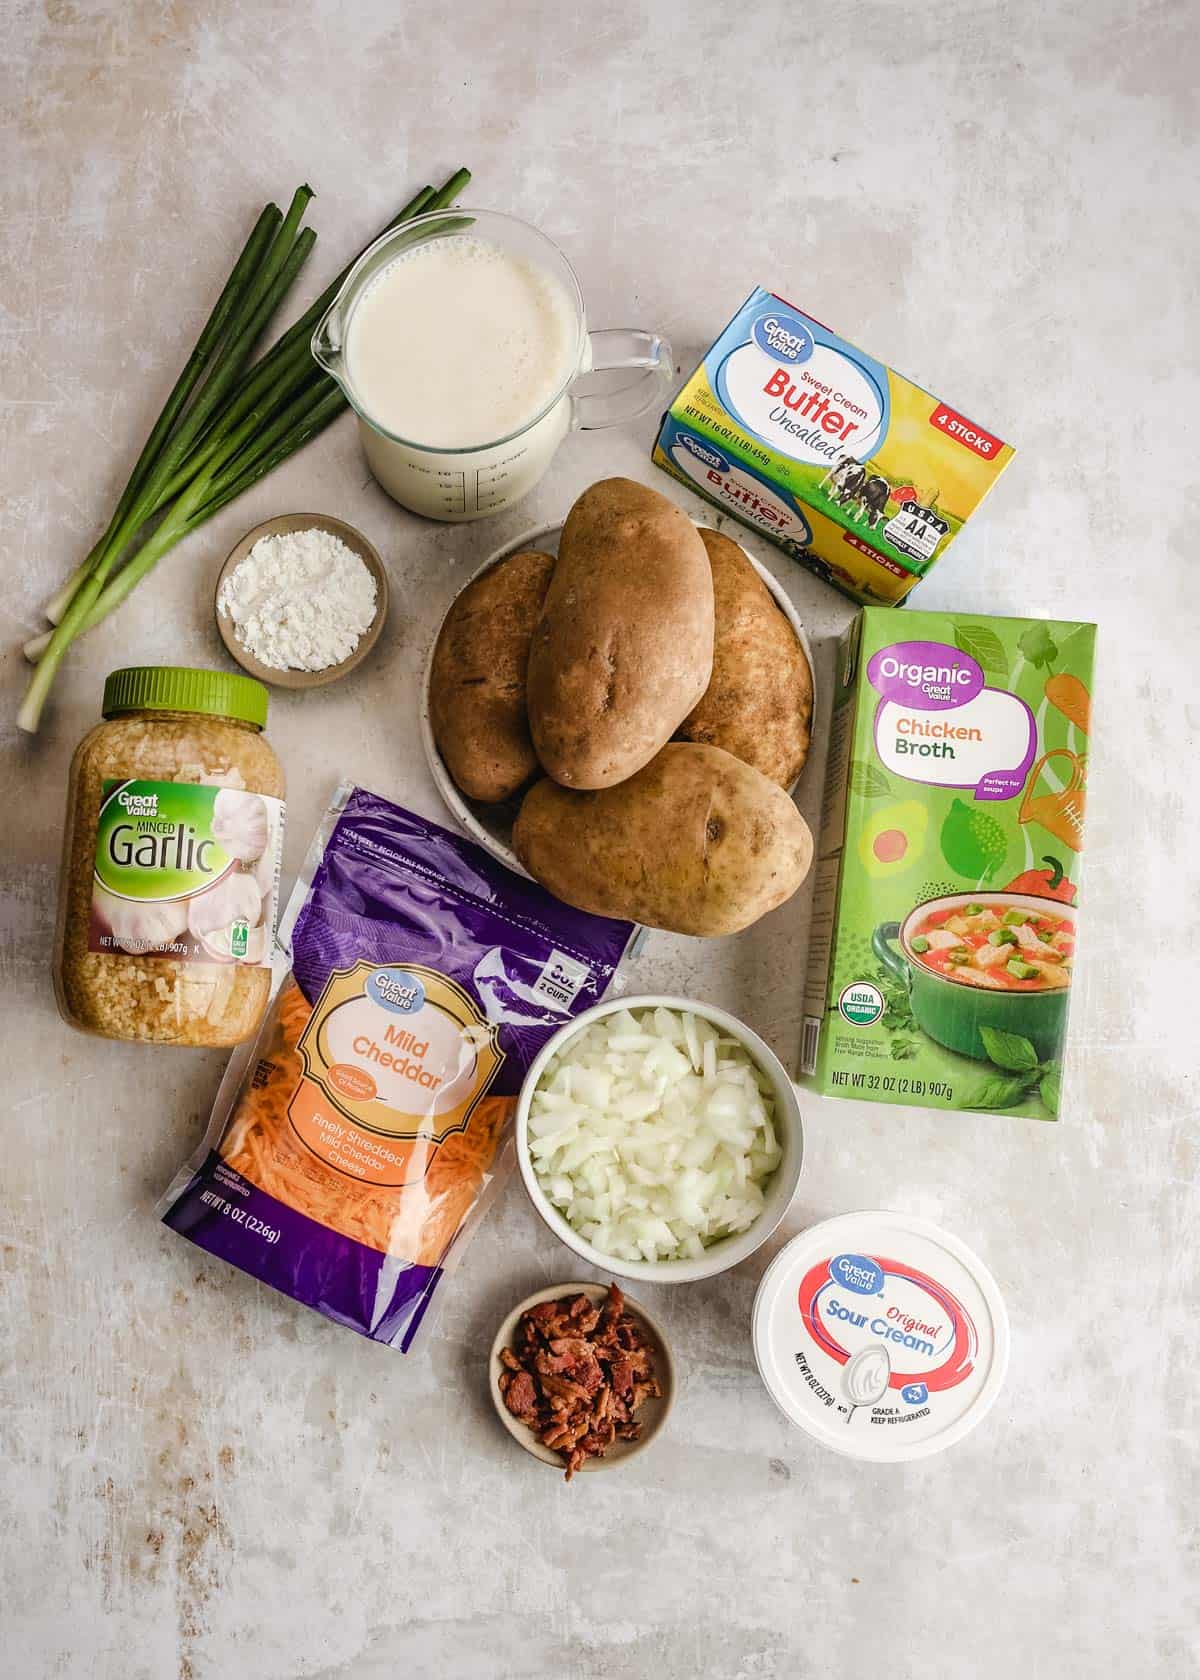 Loaded Baked Potato Soup ingredients